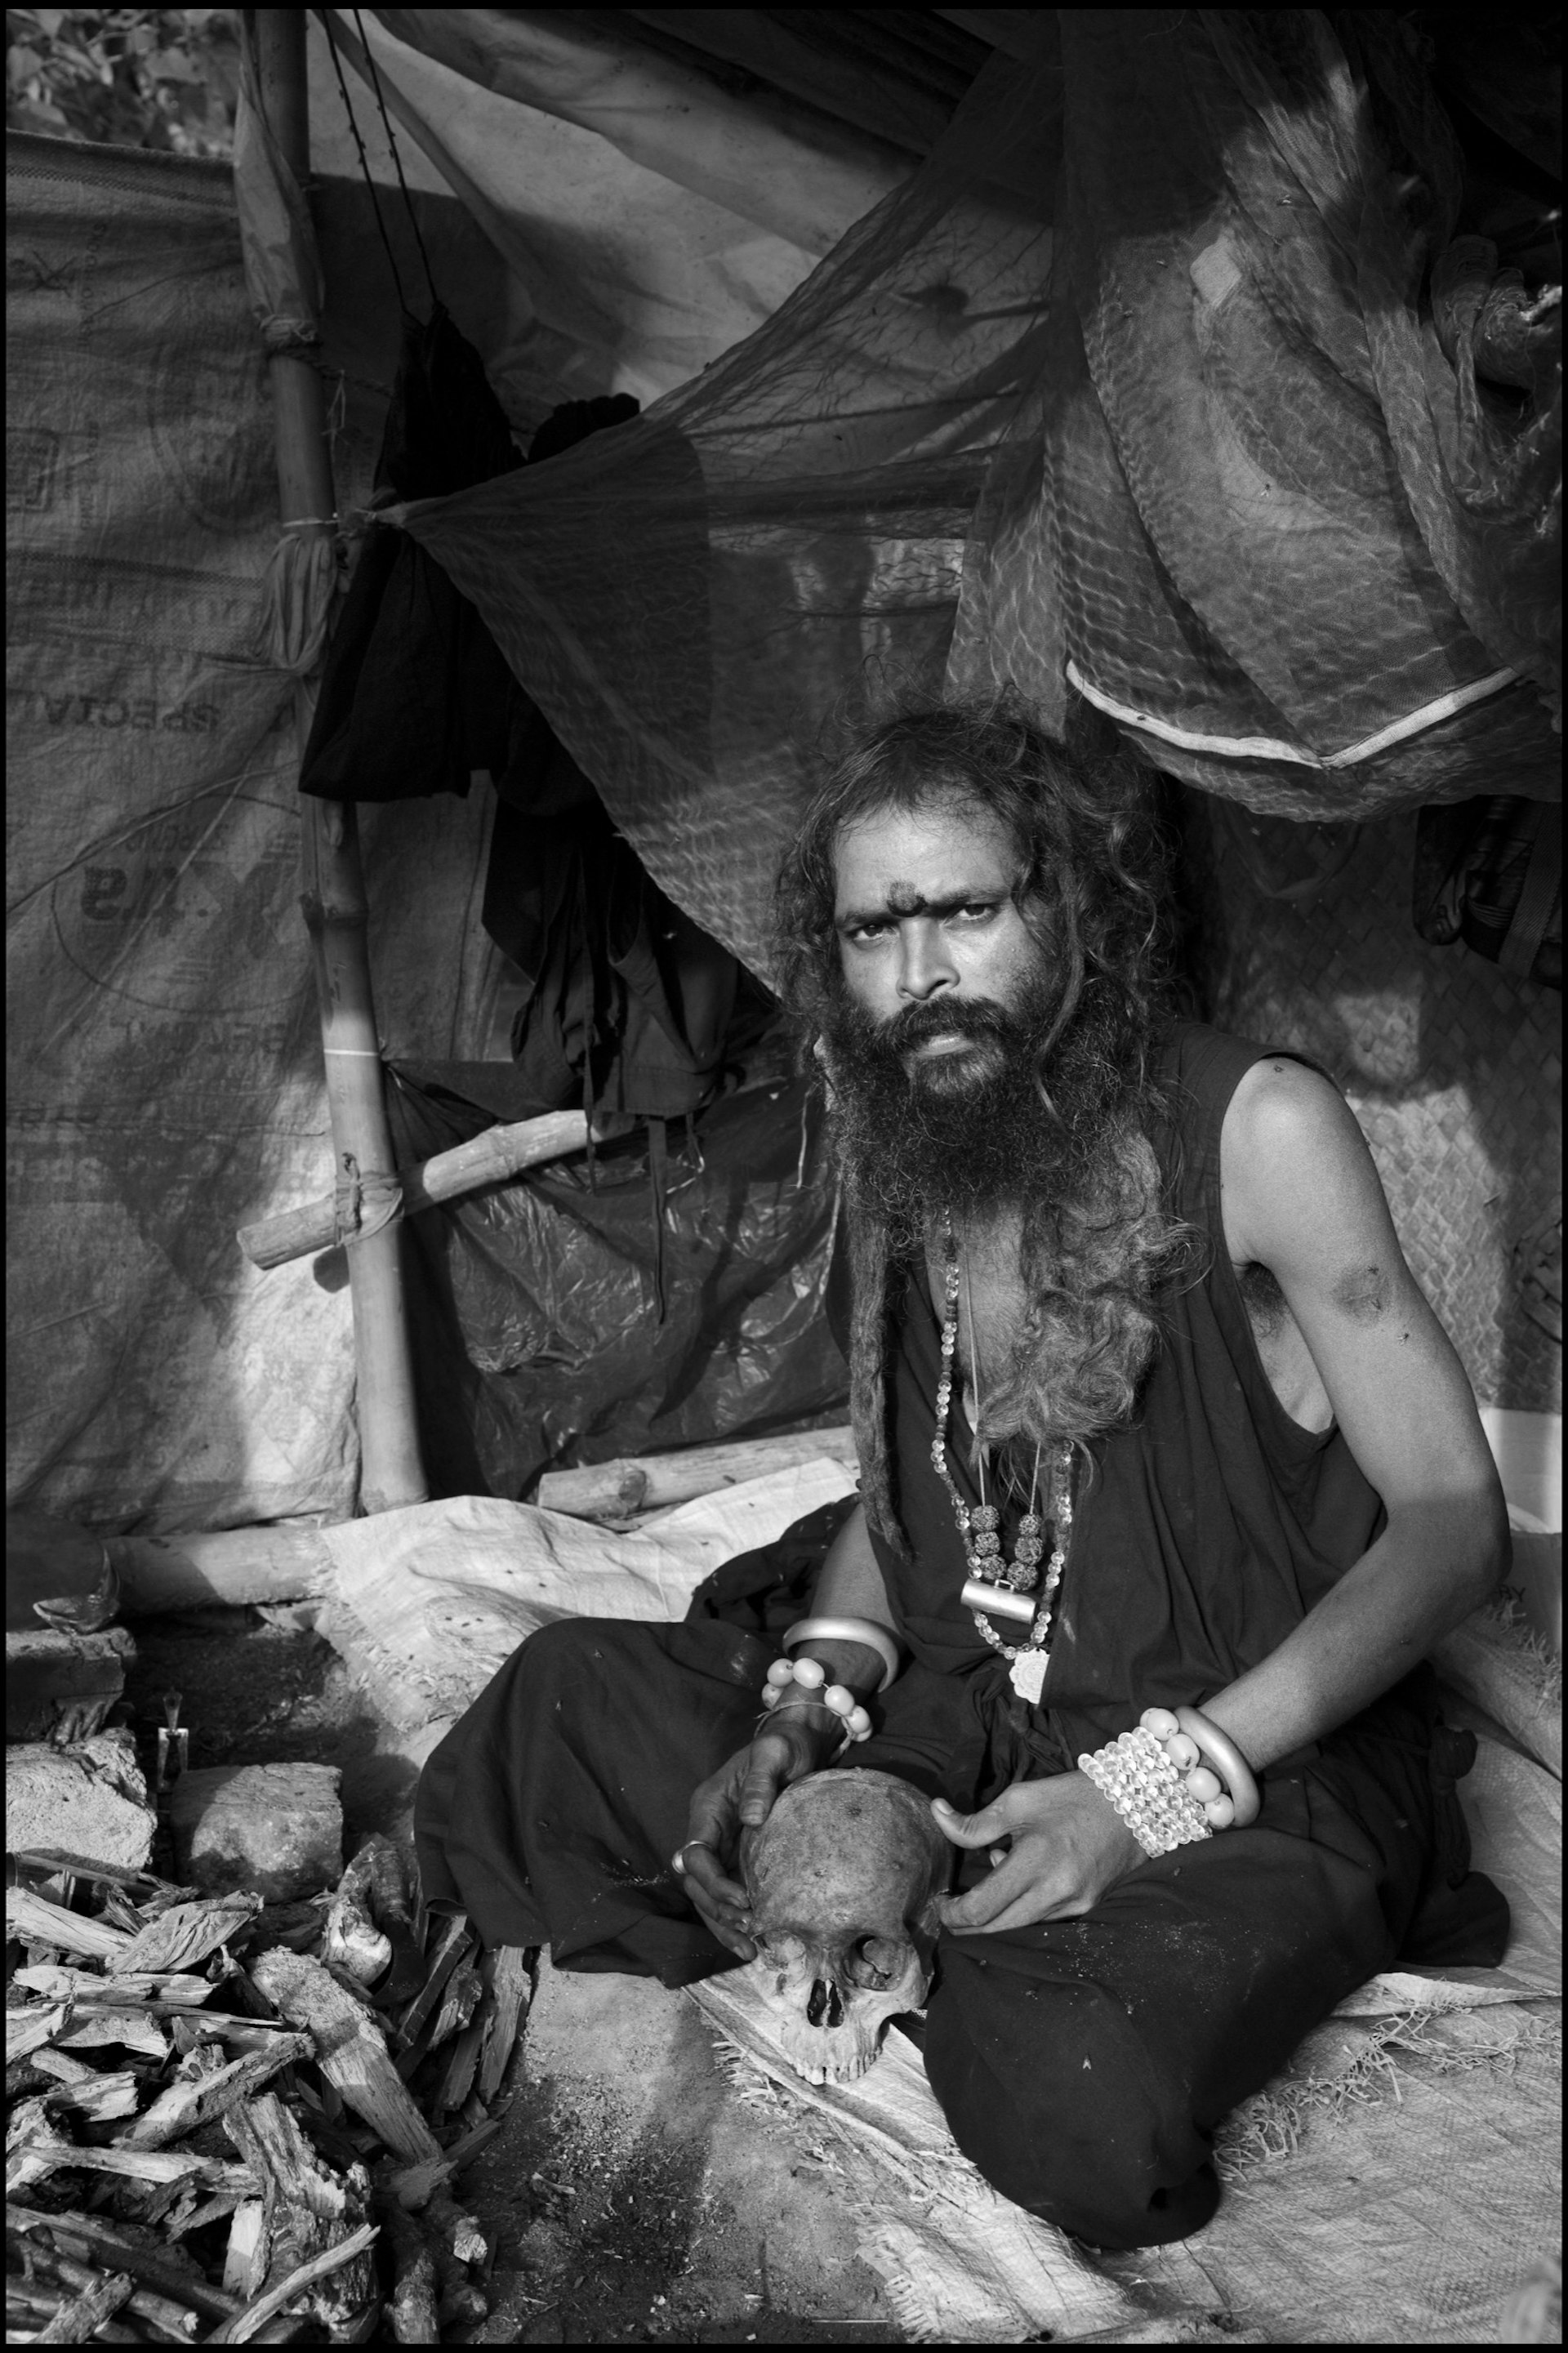 In the grounds of the Bamakhepa burning ghat, a Tantric sannyasi uses the skull of his dead guru ‘to enhance his spiritual powers’ during meditation; Tarapith, India. 